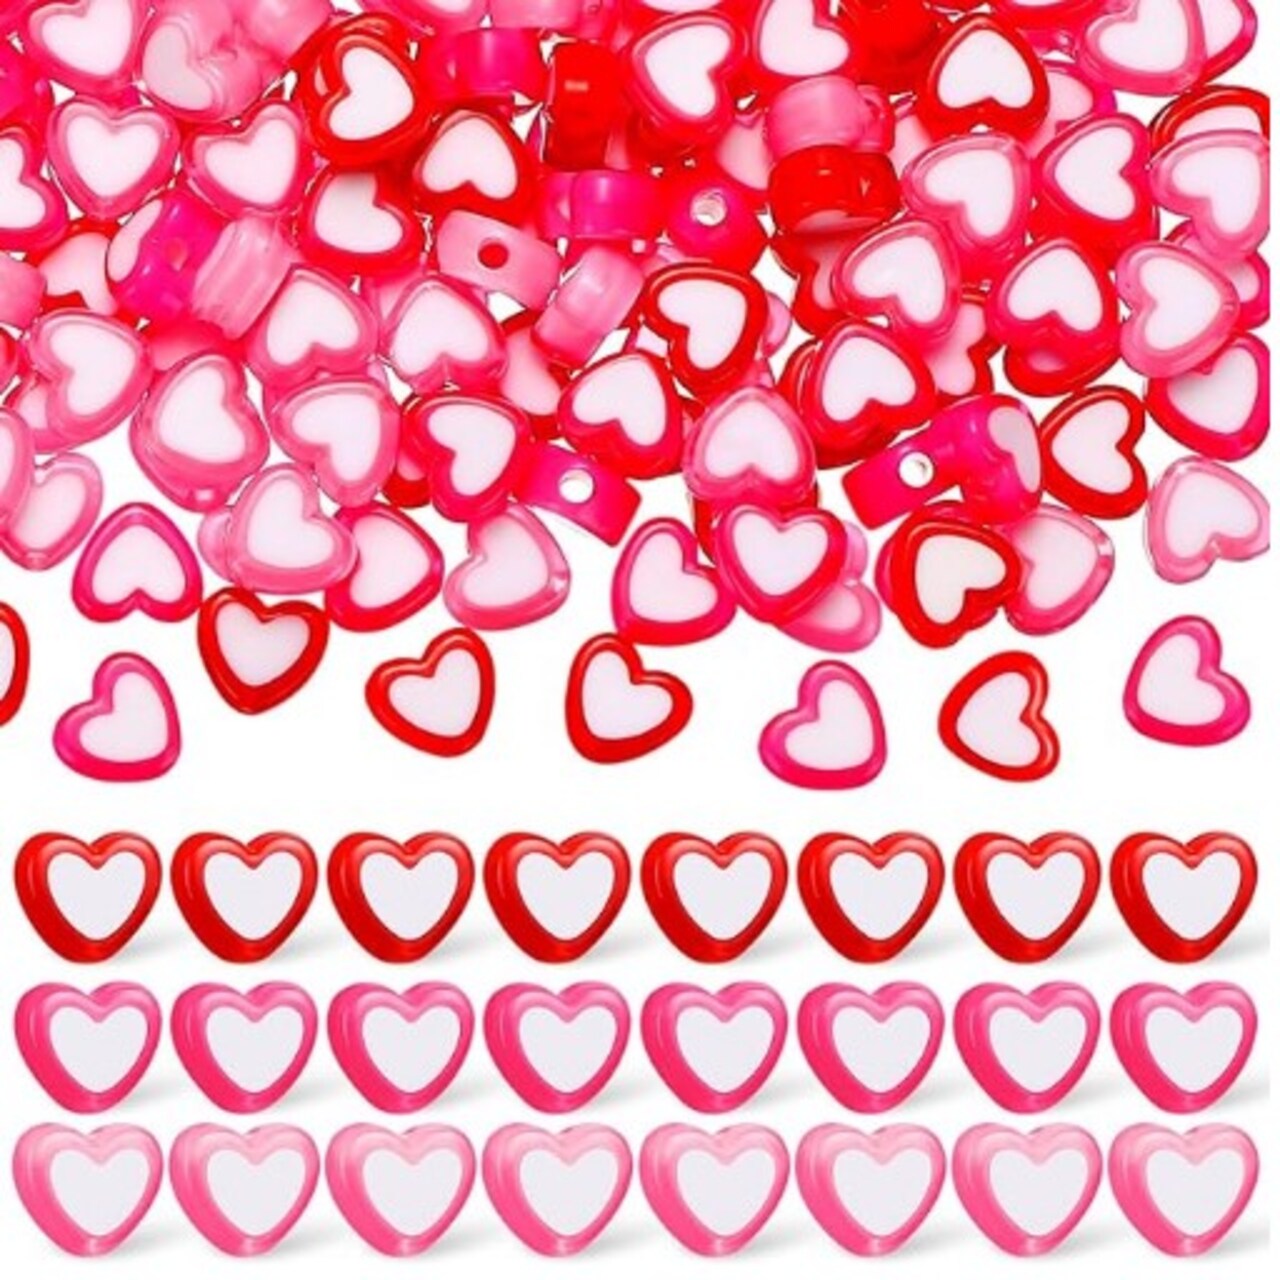 Heart Spacer Beads 600 Pcs 8mm Heart Shape Beads in 3 Colors Double Heart  Beads Colorful Bright Looking Mixed Flat Loose Pony Beads 8mm with 1.8mm  Hole for DIY Crafts Accessories